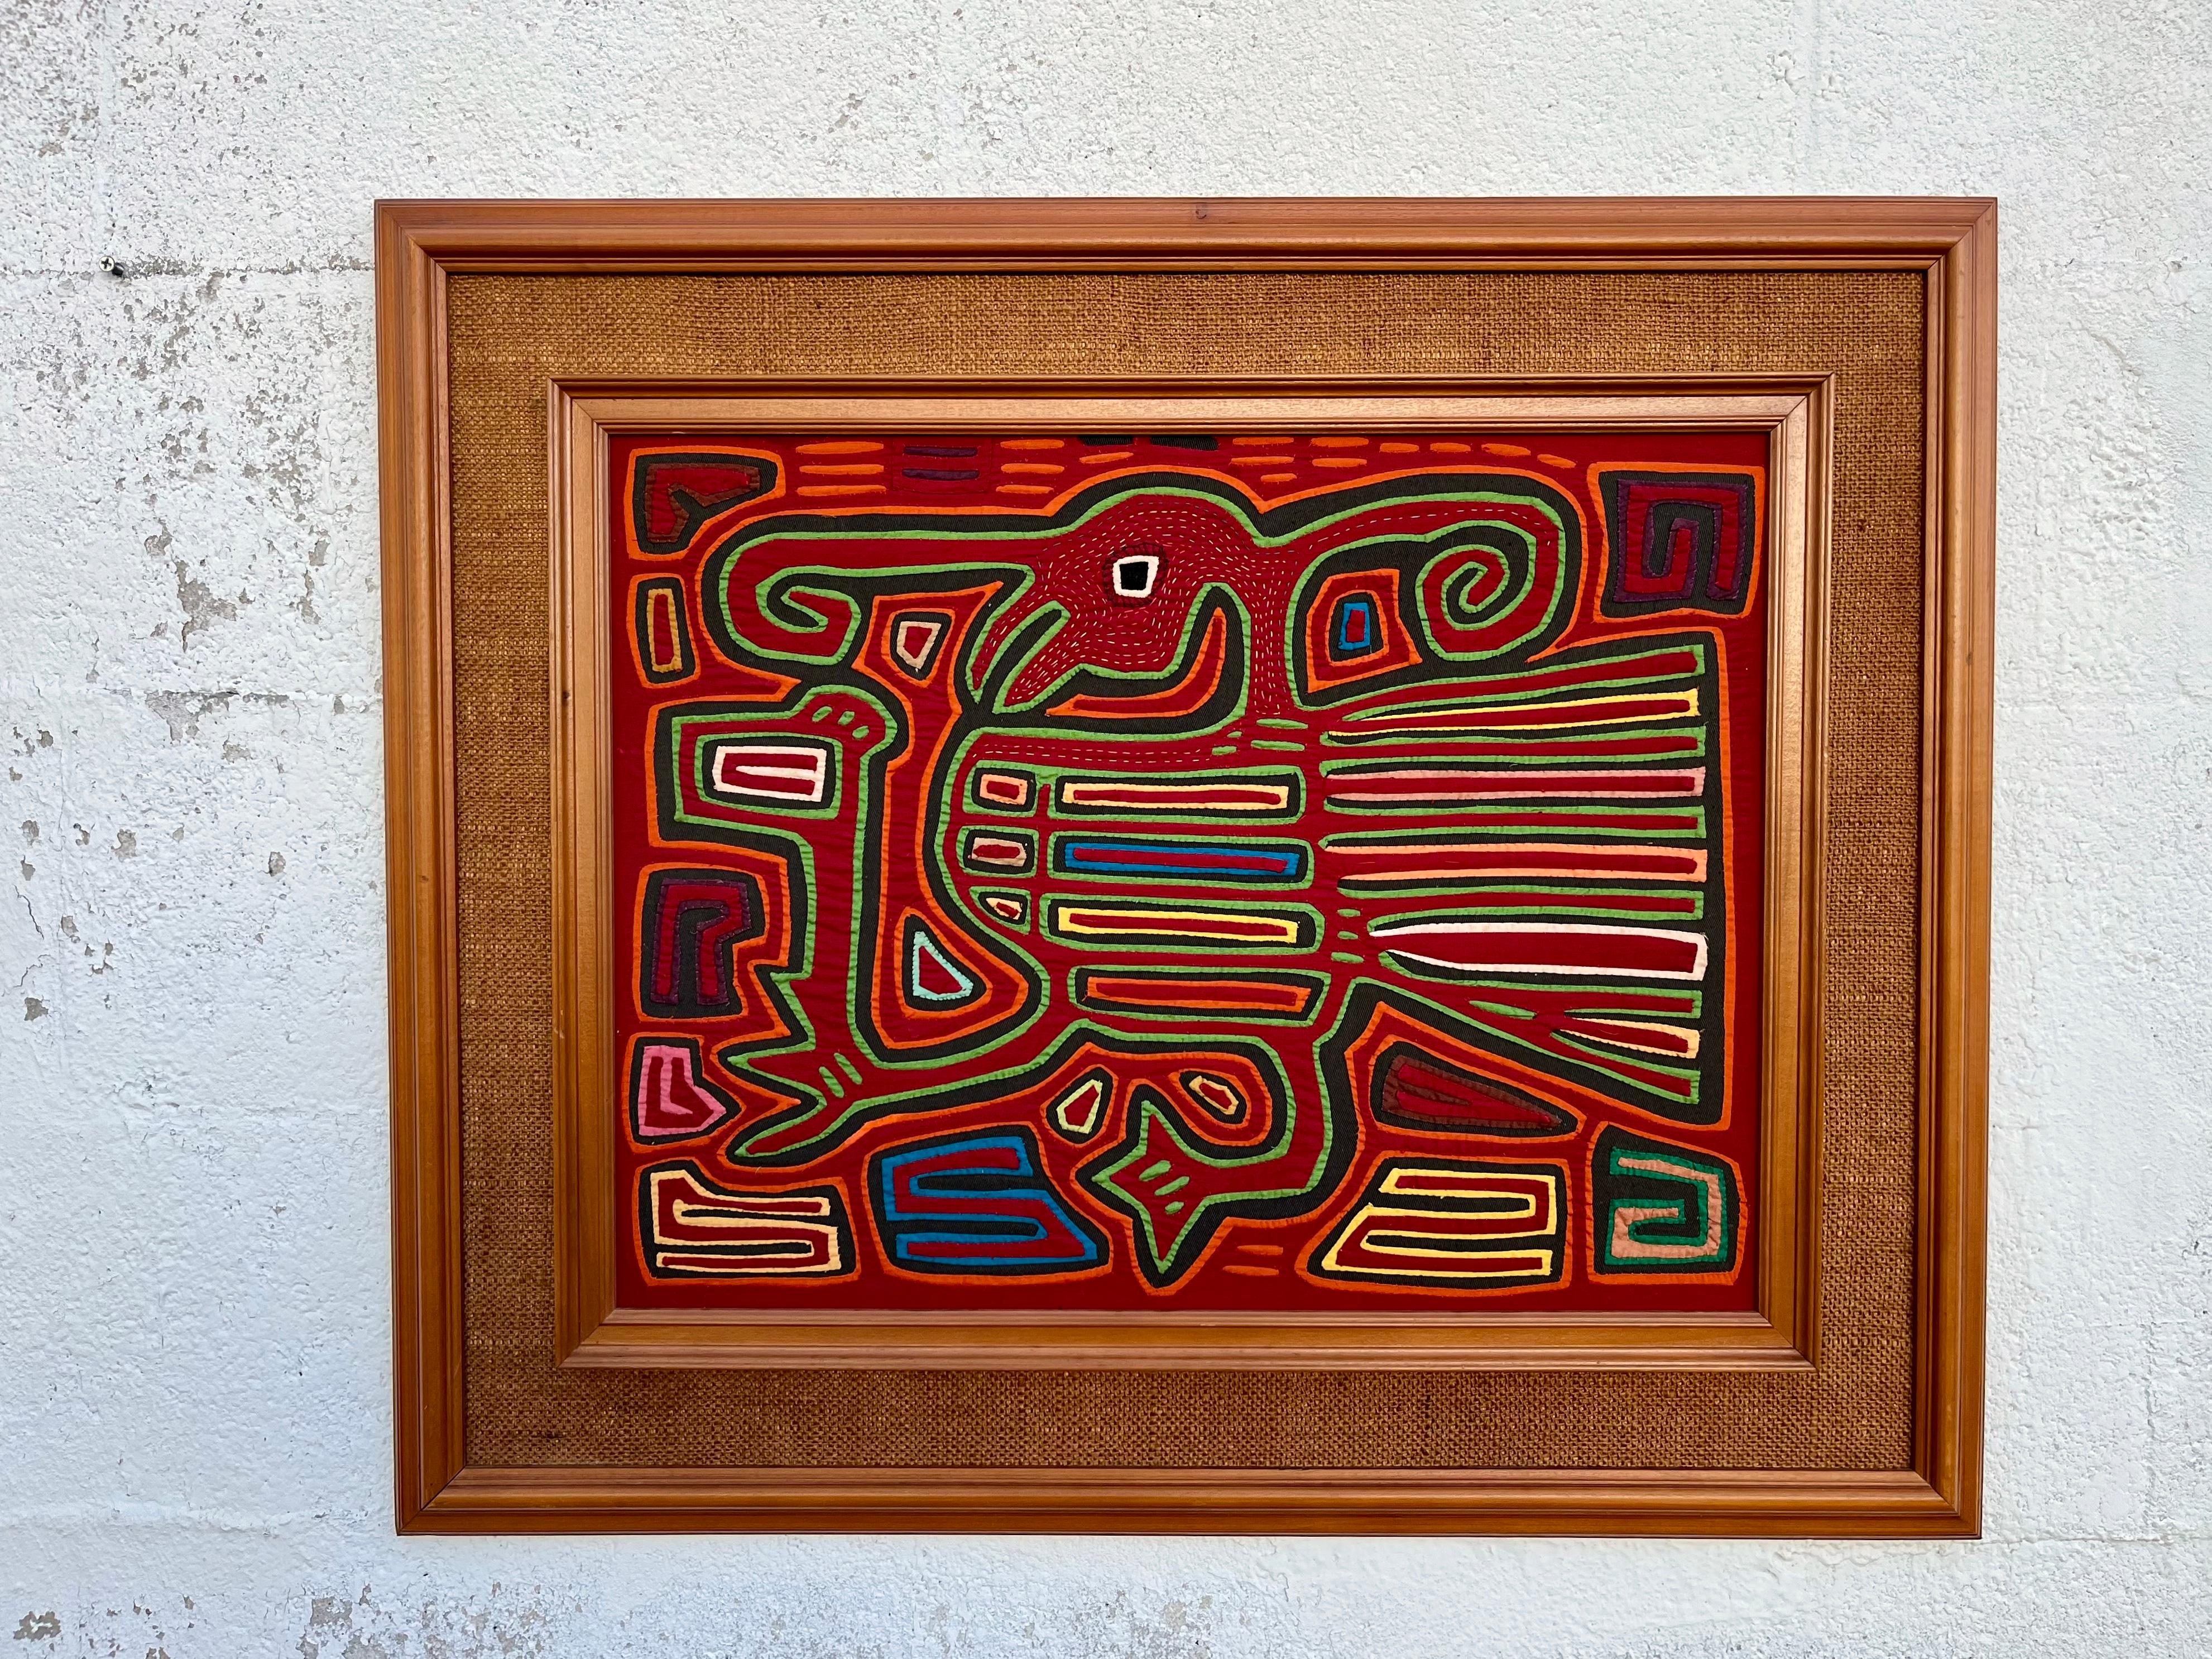 Large Vintage Tribal Mola Framed Handcrafted Textile Art. Circa 1960s
Mola is a traditional textile craft made from layers of colored fabric, stitched and cut using appliqué techniques to create patterns and pictures. Handmade by Kuna tribe on the